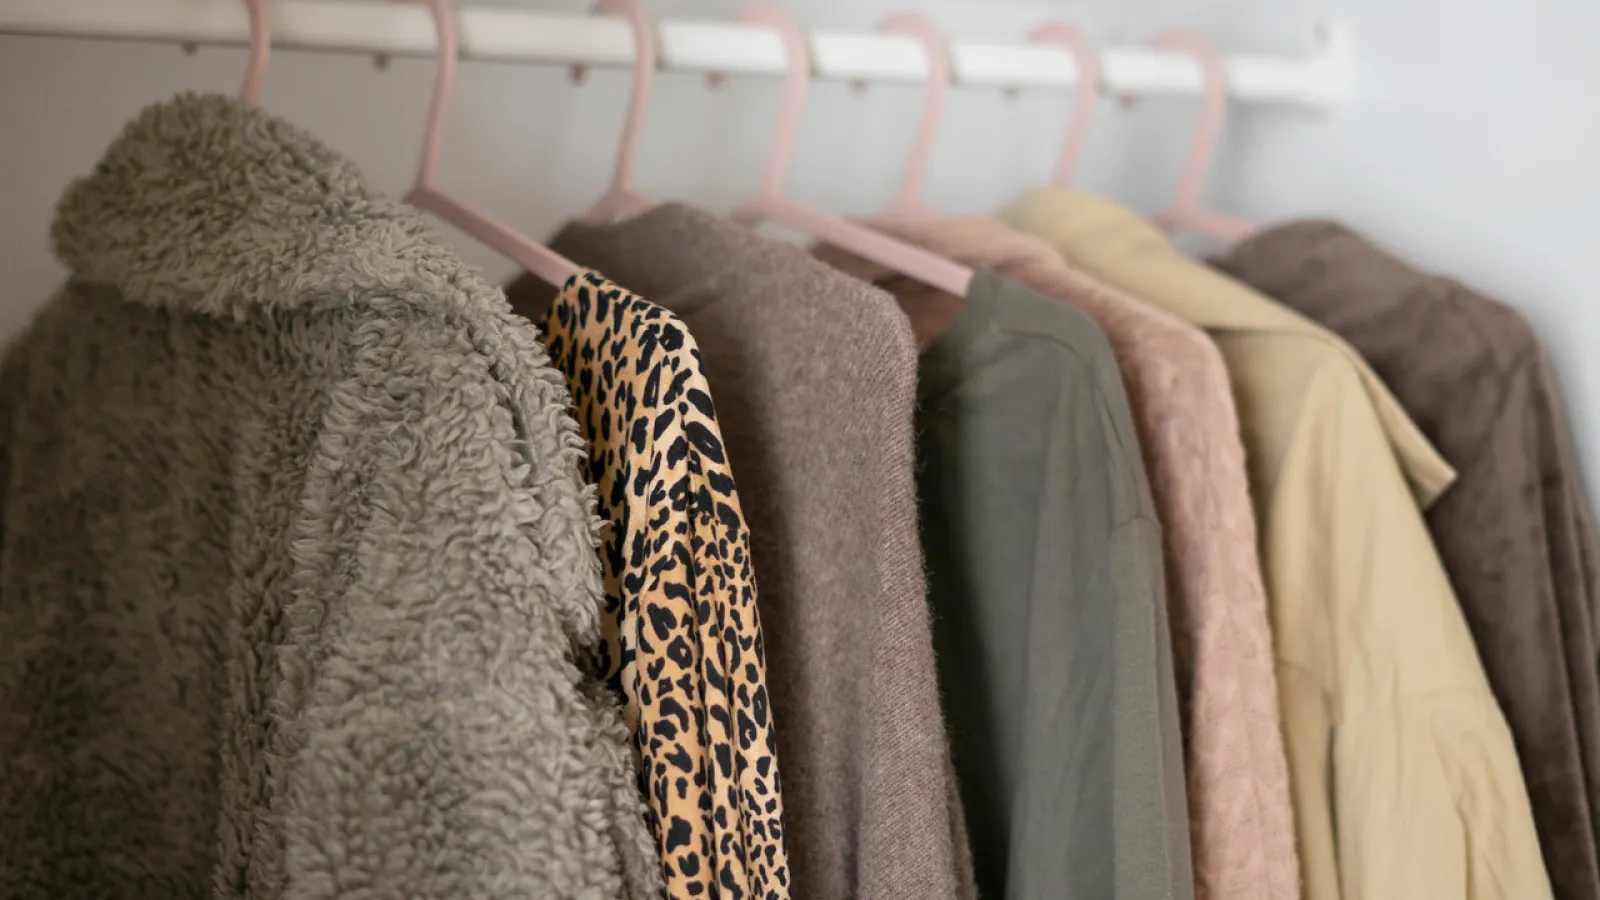 How To Properly Wash and Store Your Winter Coats